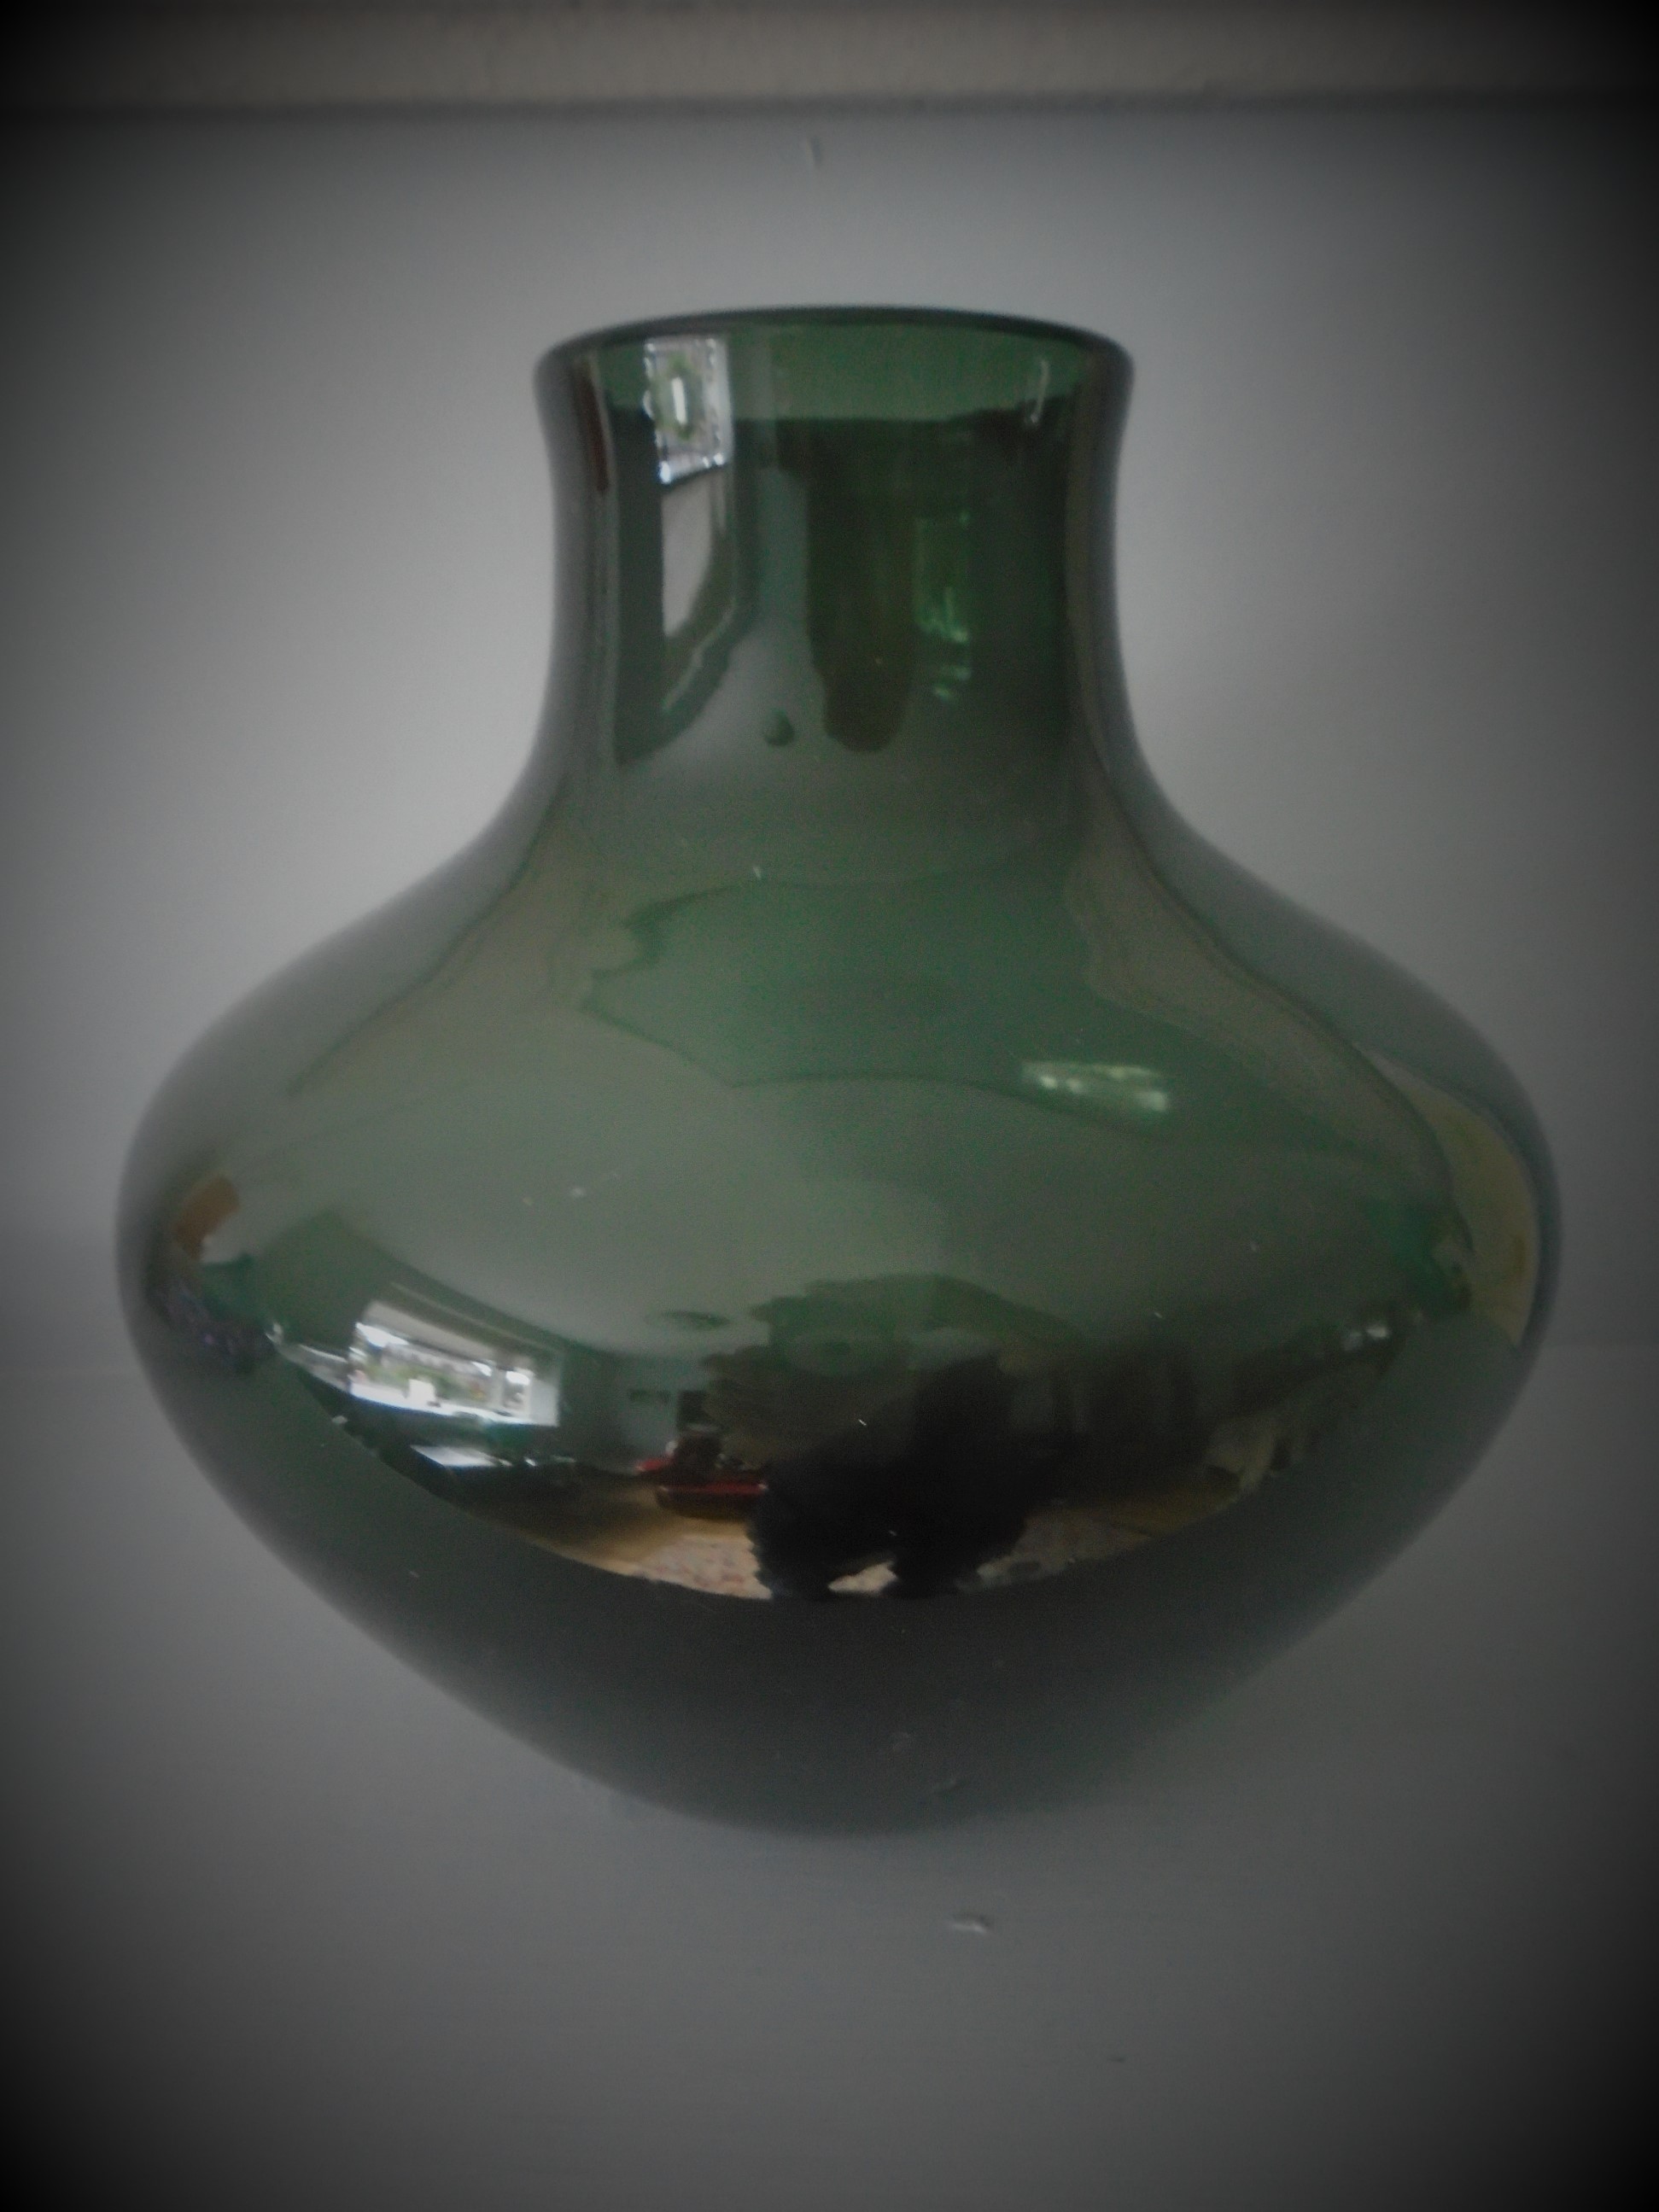 Offered for sale is what I believe to be a fine example of a GEOFFREY BAXTER WHITEFRIARS SODA GLASS VASE CATALOGUE NO. 9599 IN SHADOW GREEN